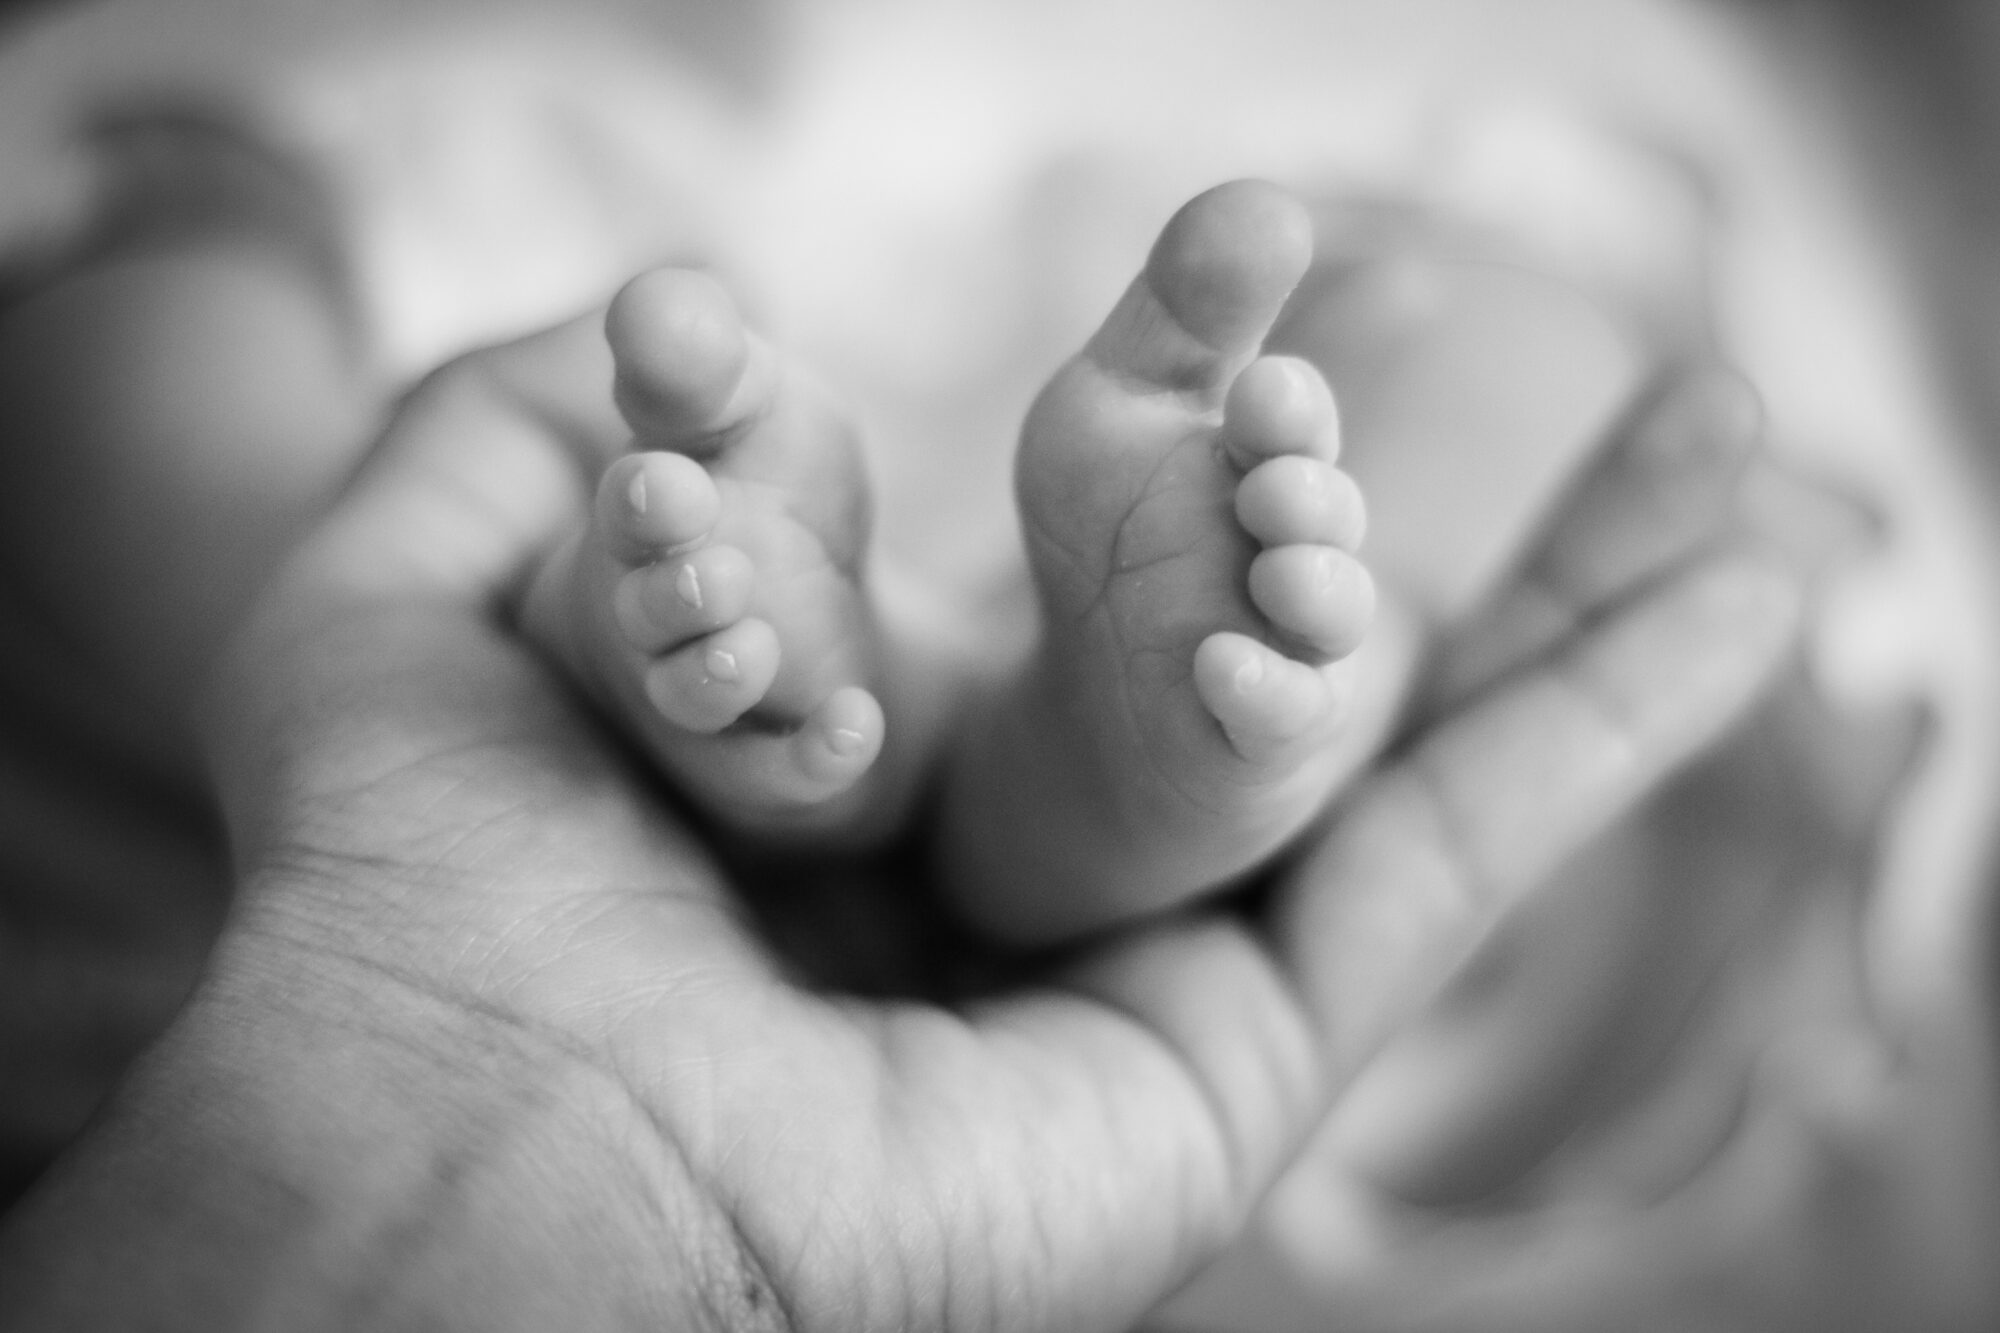 Image of a hand holding baby feet